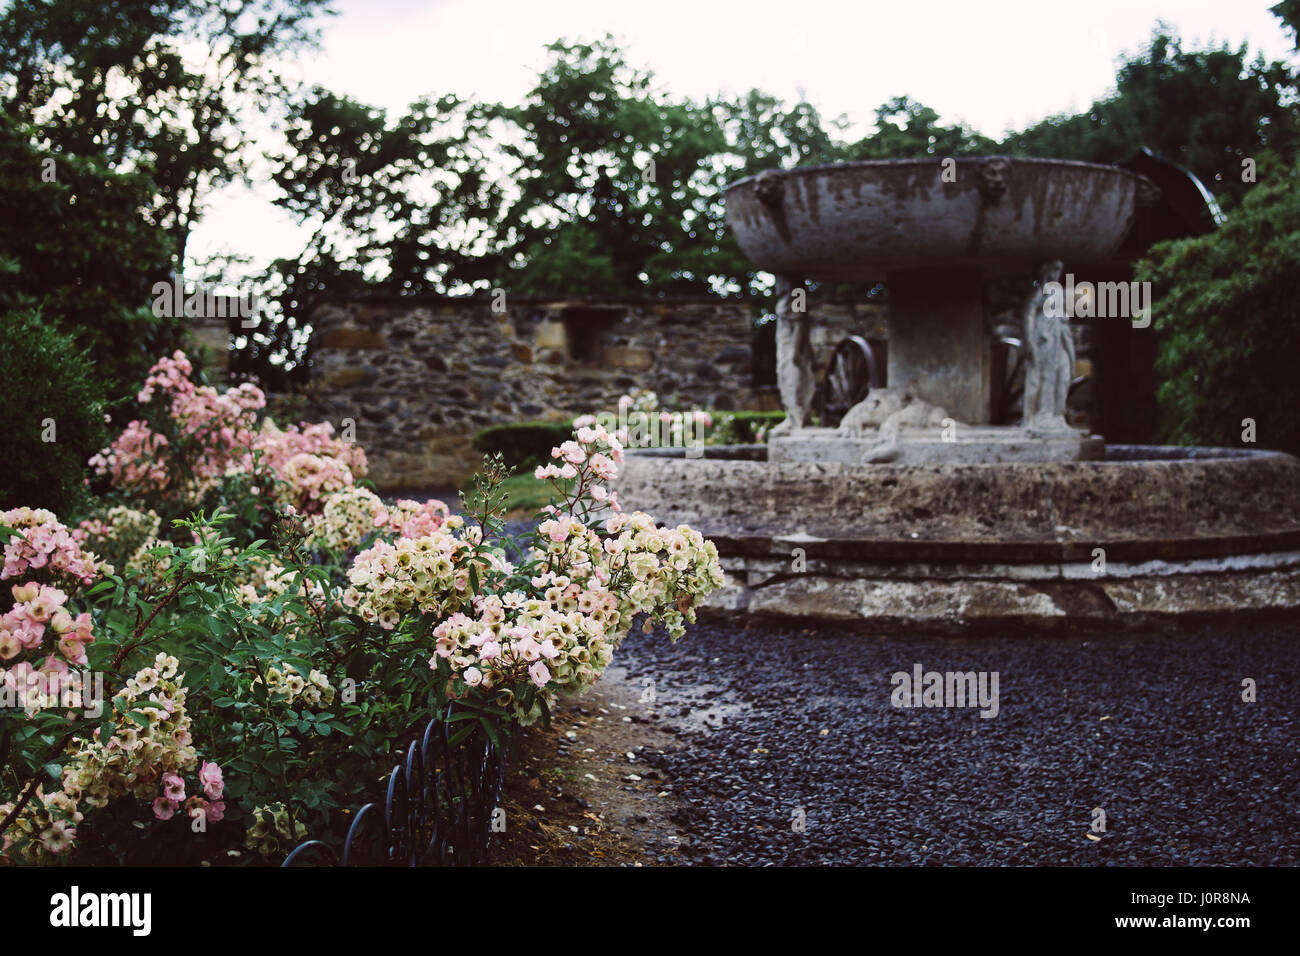 Old fountain with flowers blooming in the foreground in the gardens of the Czocha castle in Poland. Stock Photo